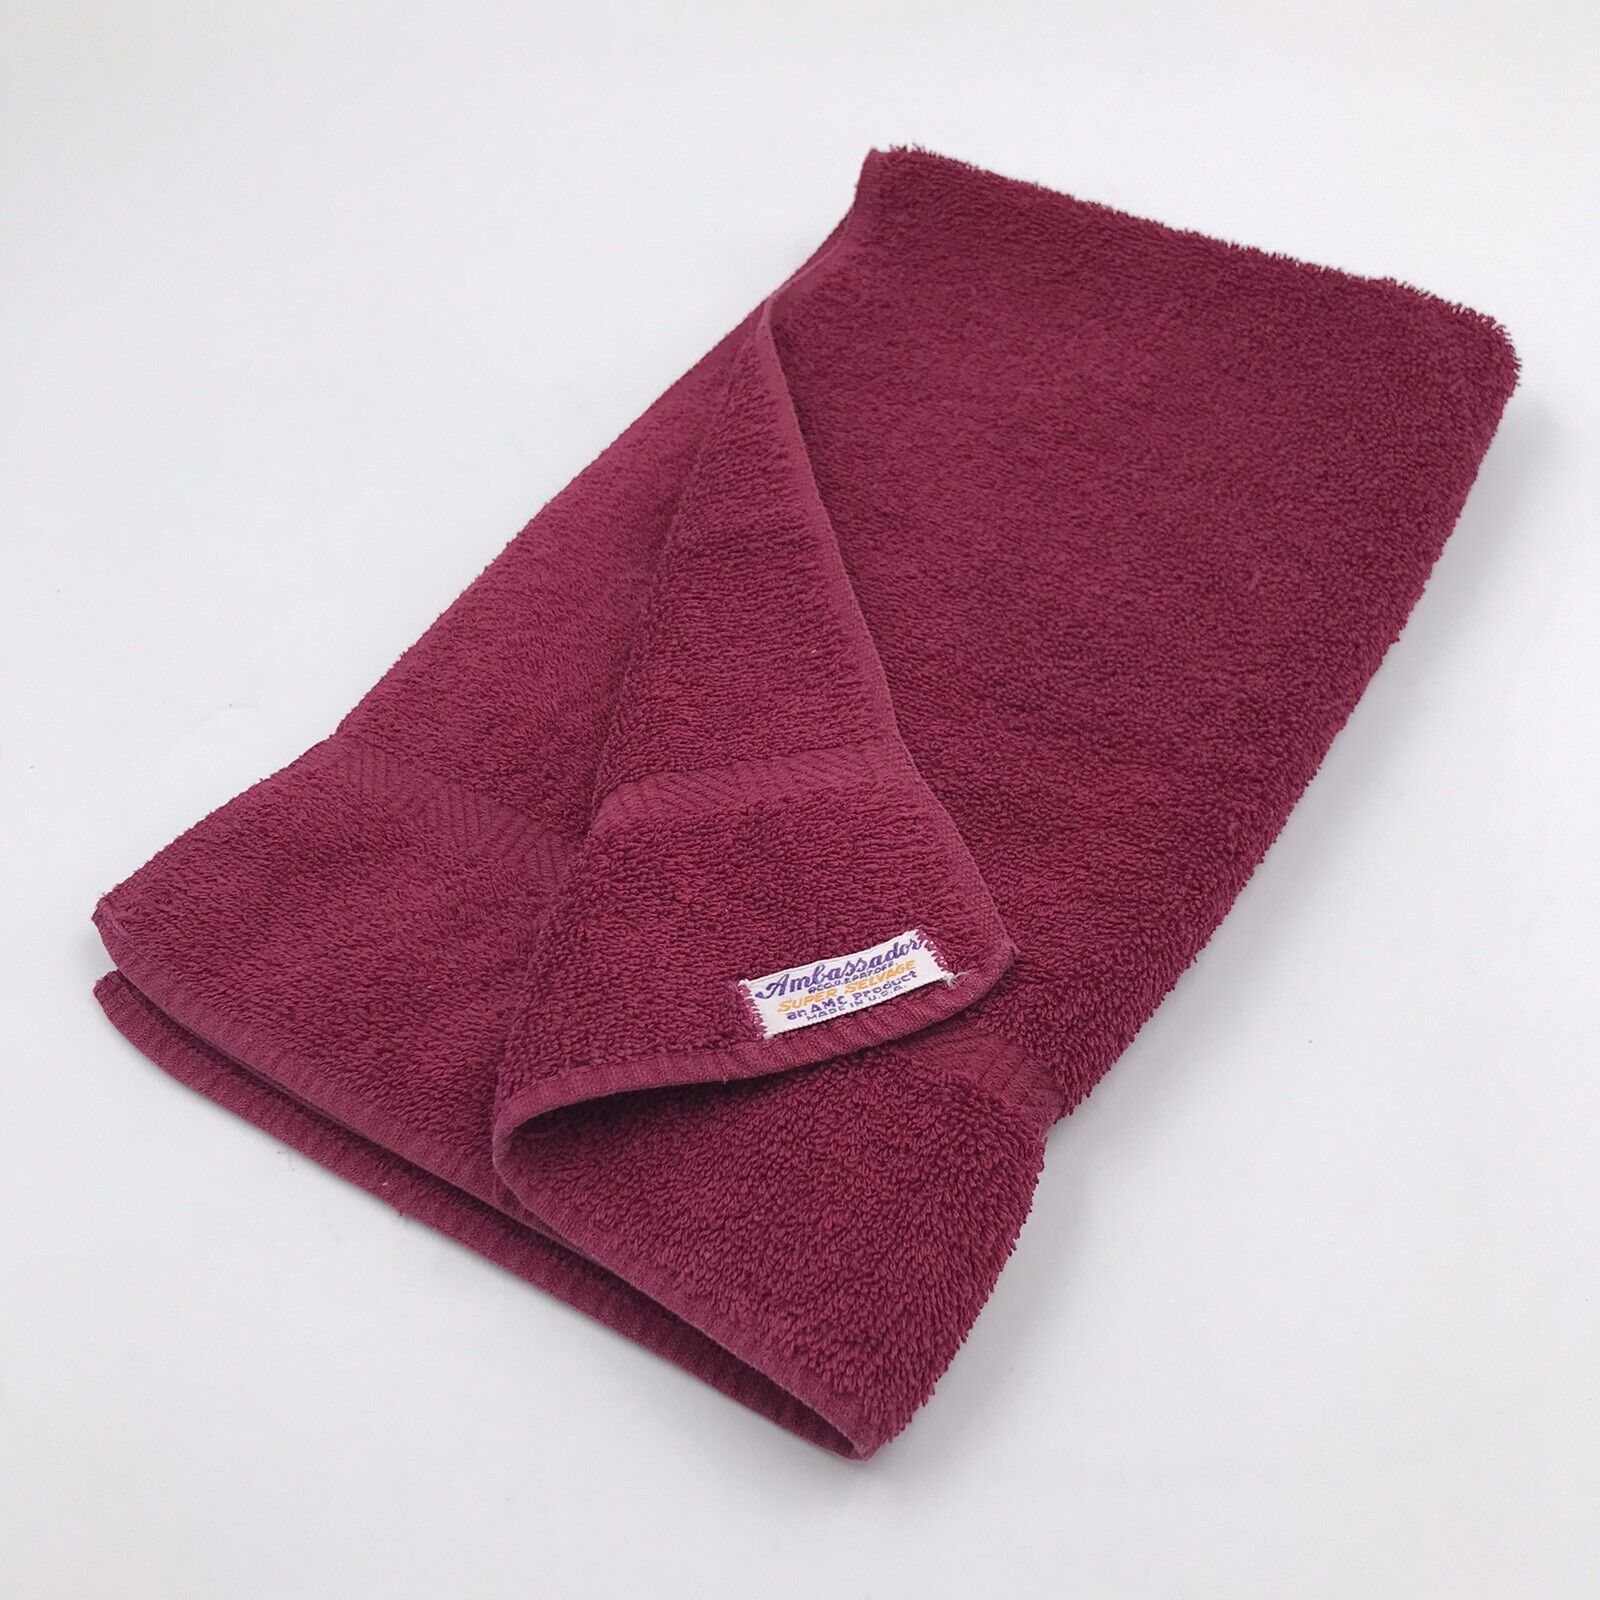 Vintage Ambassador Burgundy Red Hand Towel 25 3/4 in L x 14 1/4 in W Made in USA